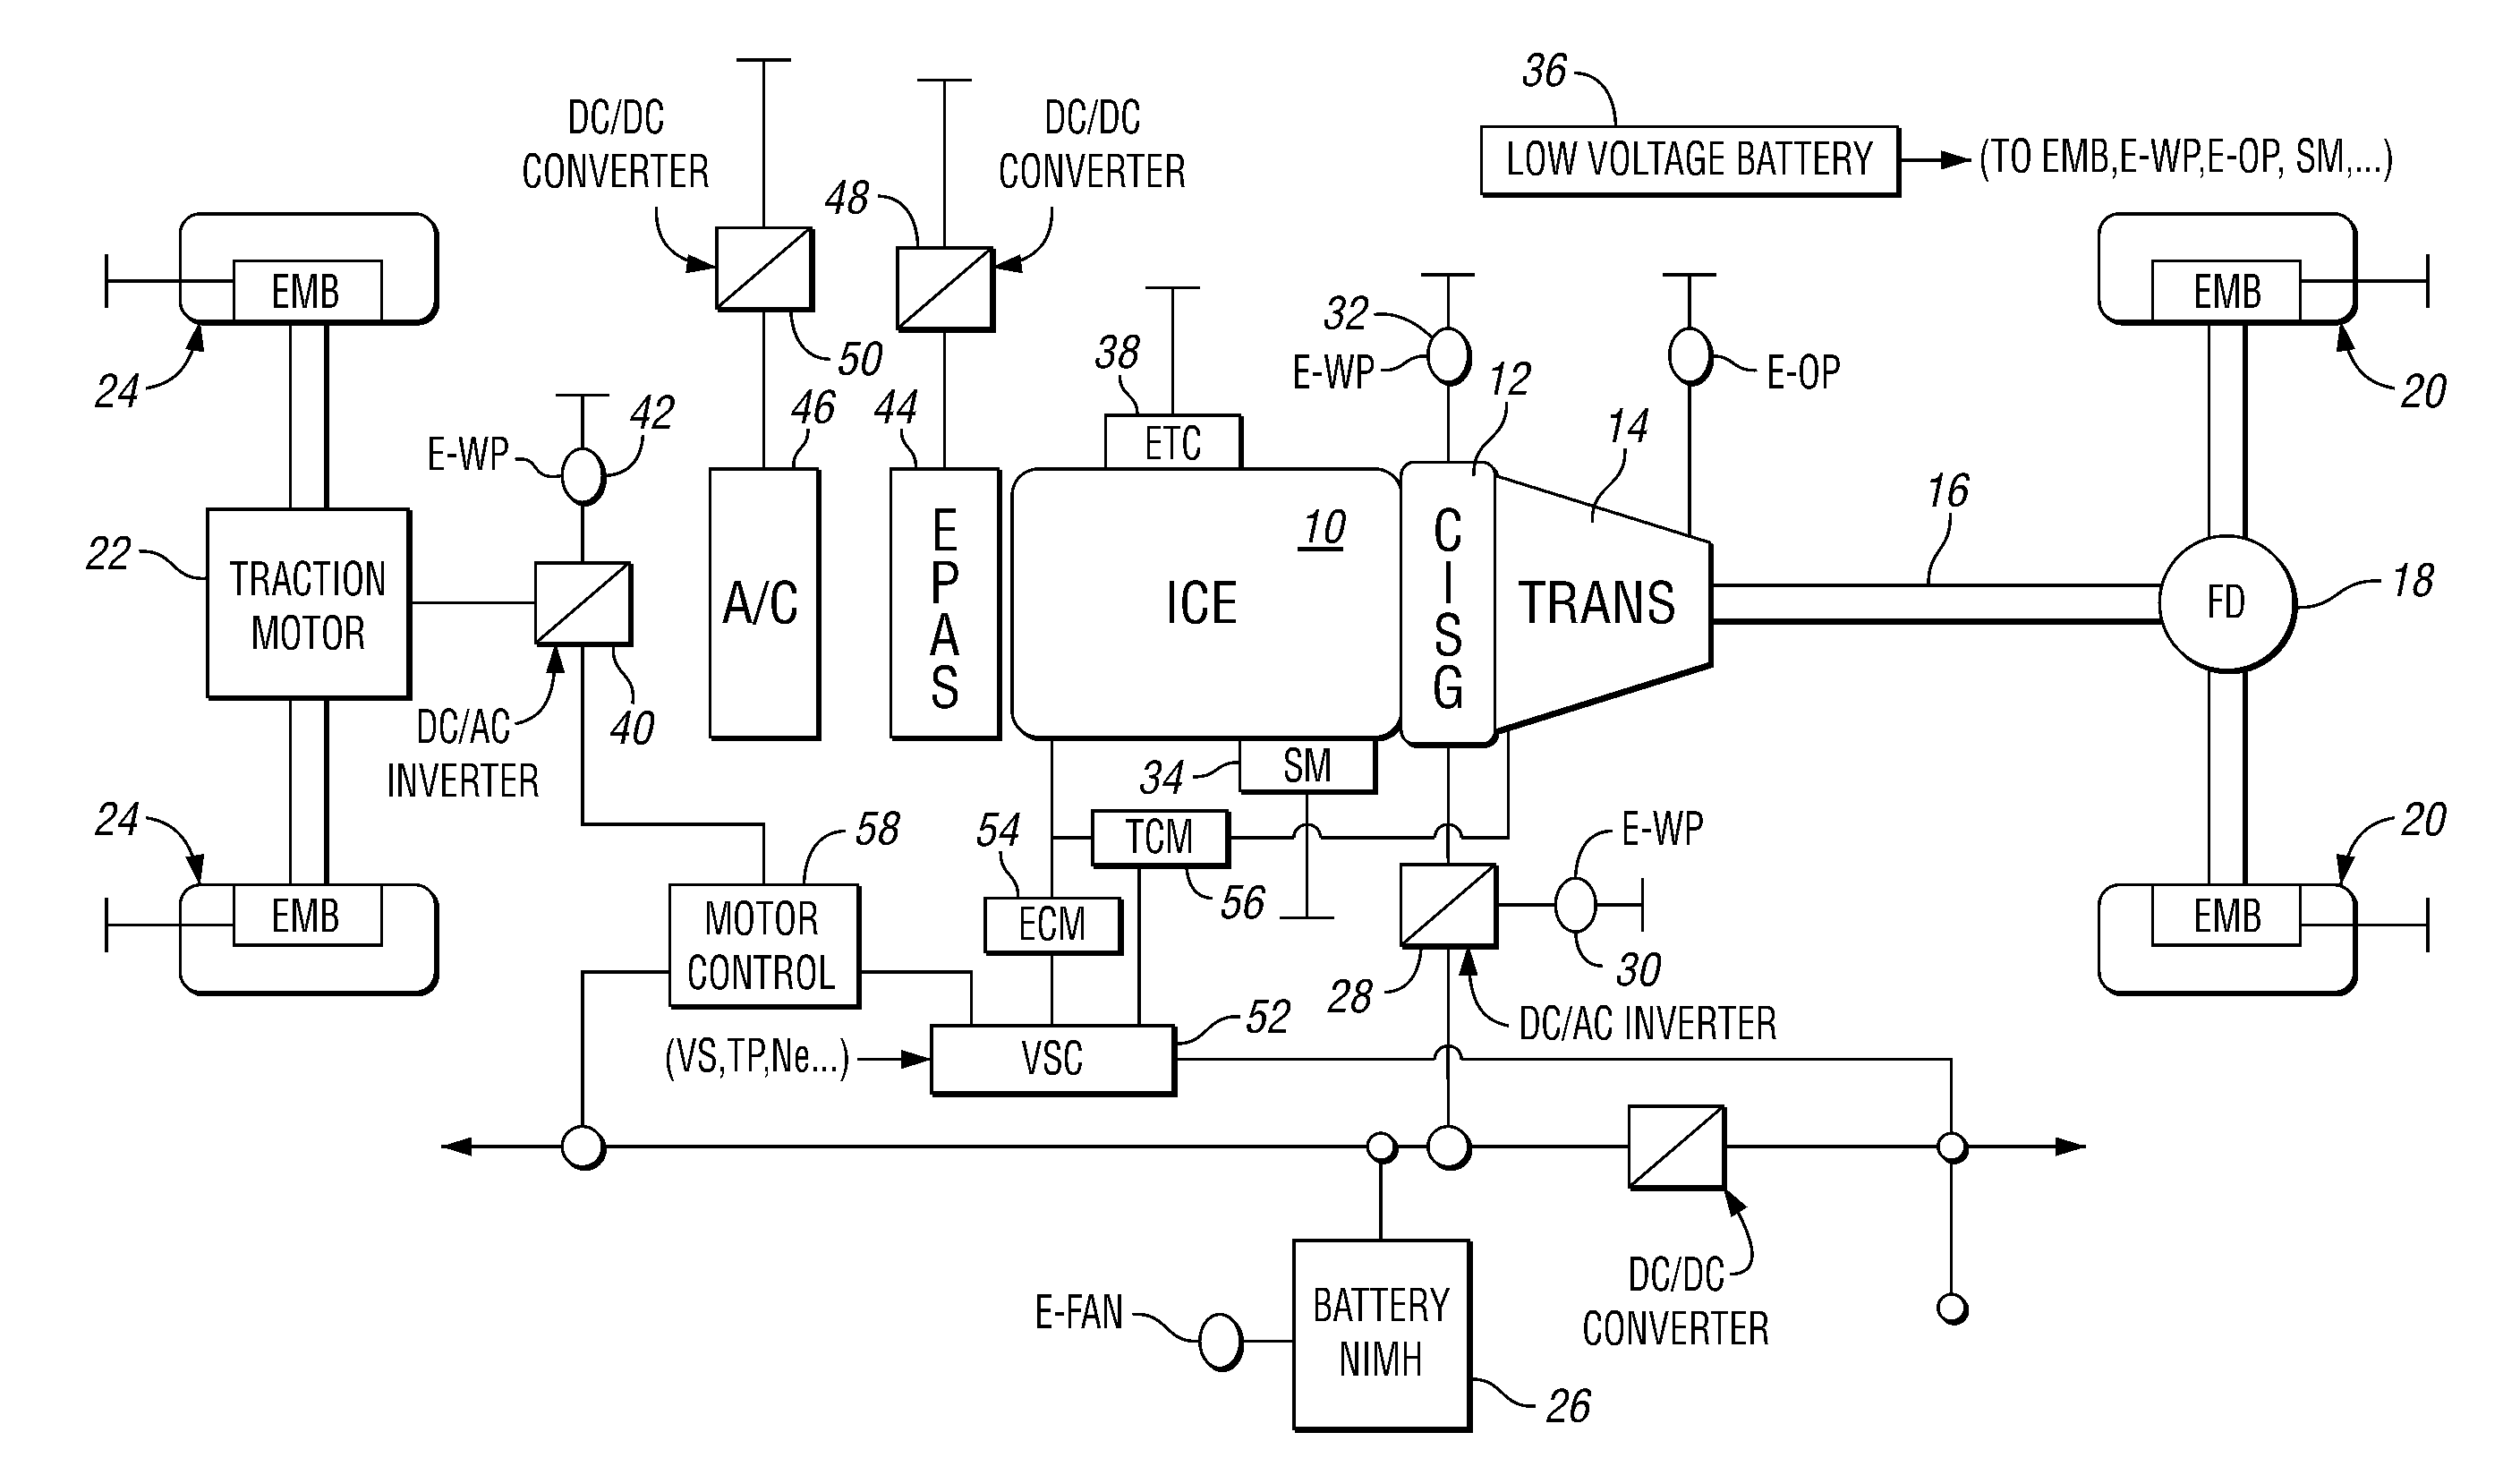 Power-on downshift control for a hybrid electric vehicle powertrain